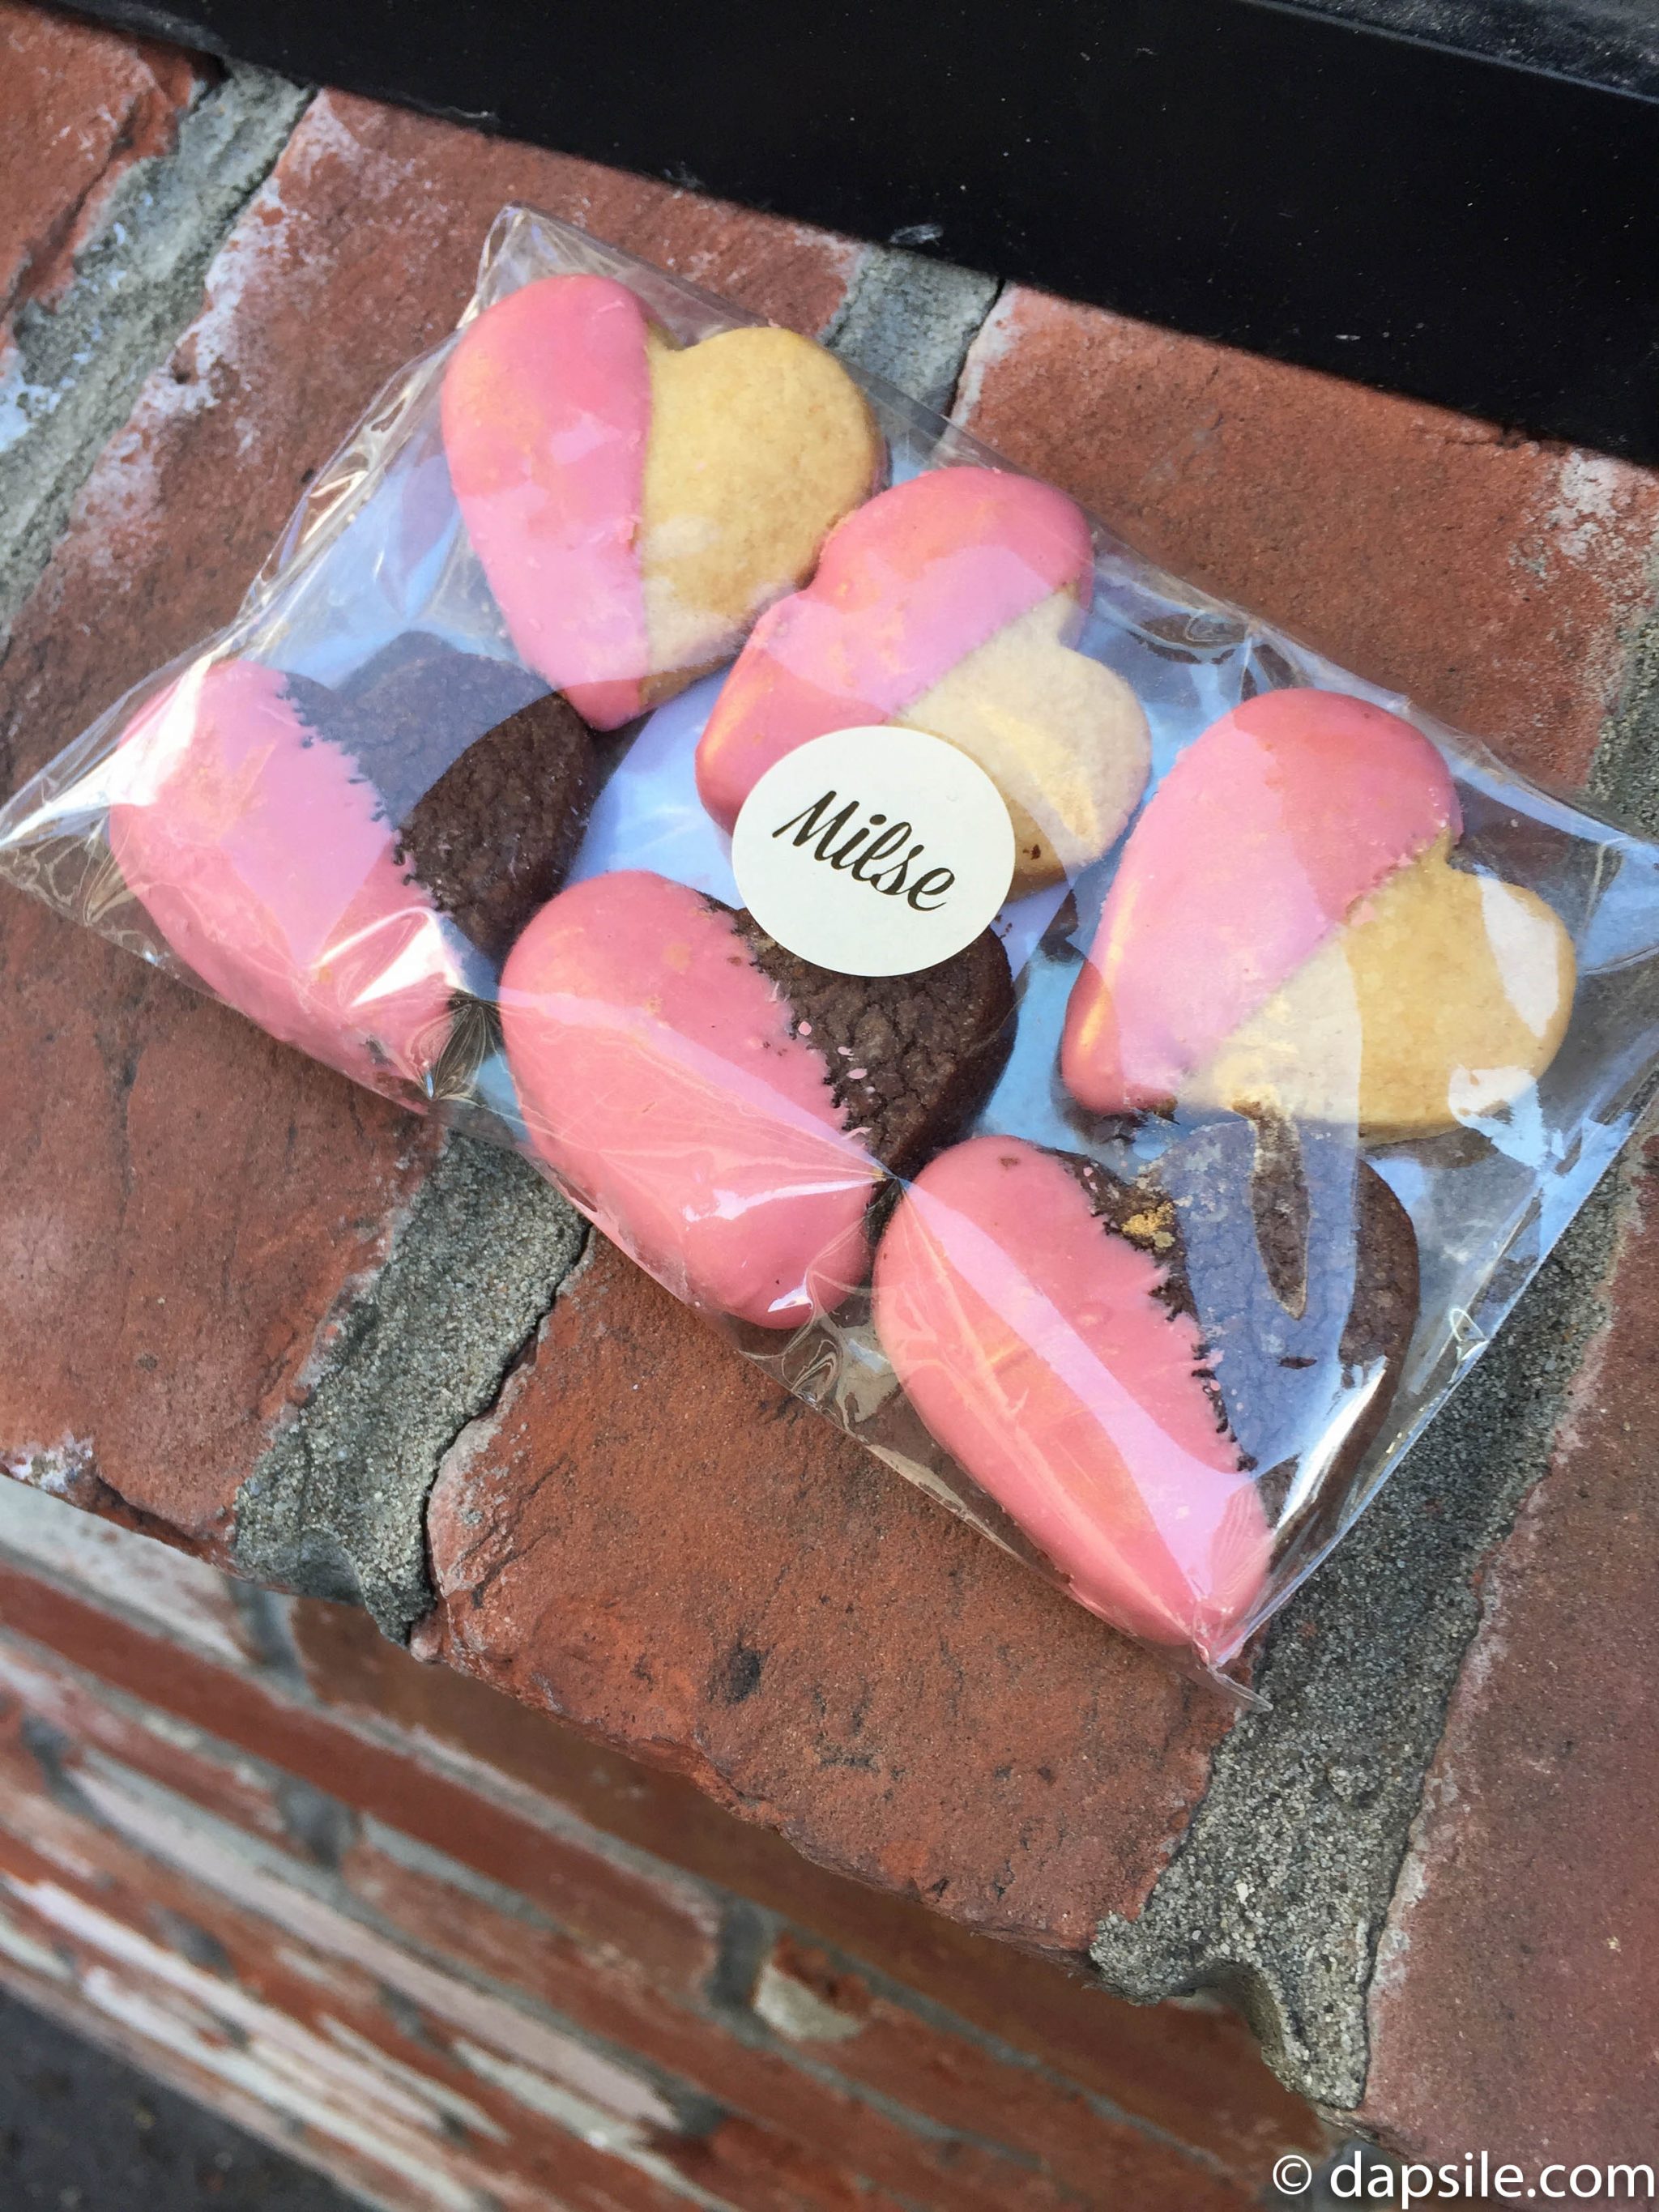 Chocolate and Vanilla Heart Cookies from Milse in Auckland